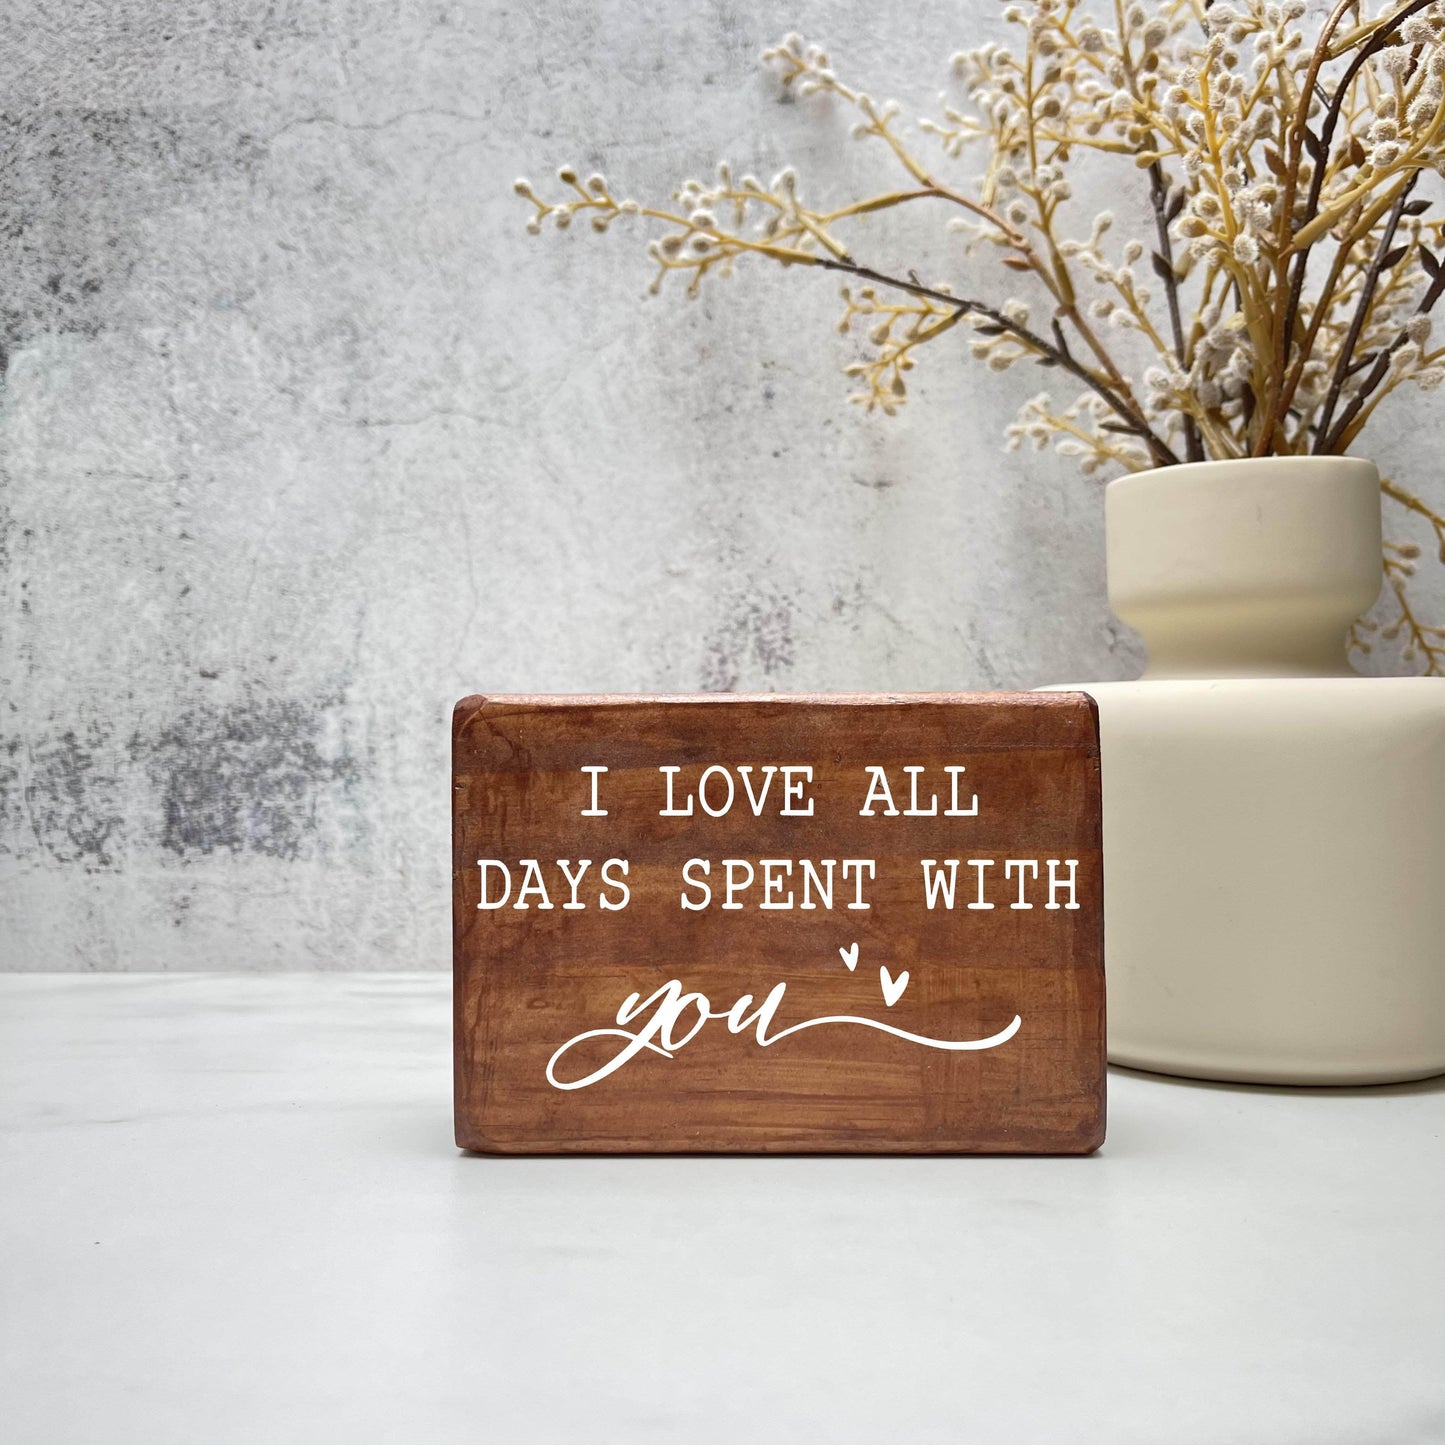 I love all my days spent with you wood sign, farmhouse sign, rustic decor, home decor